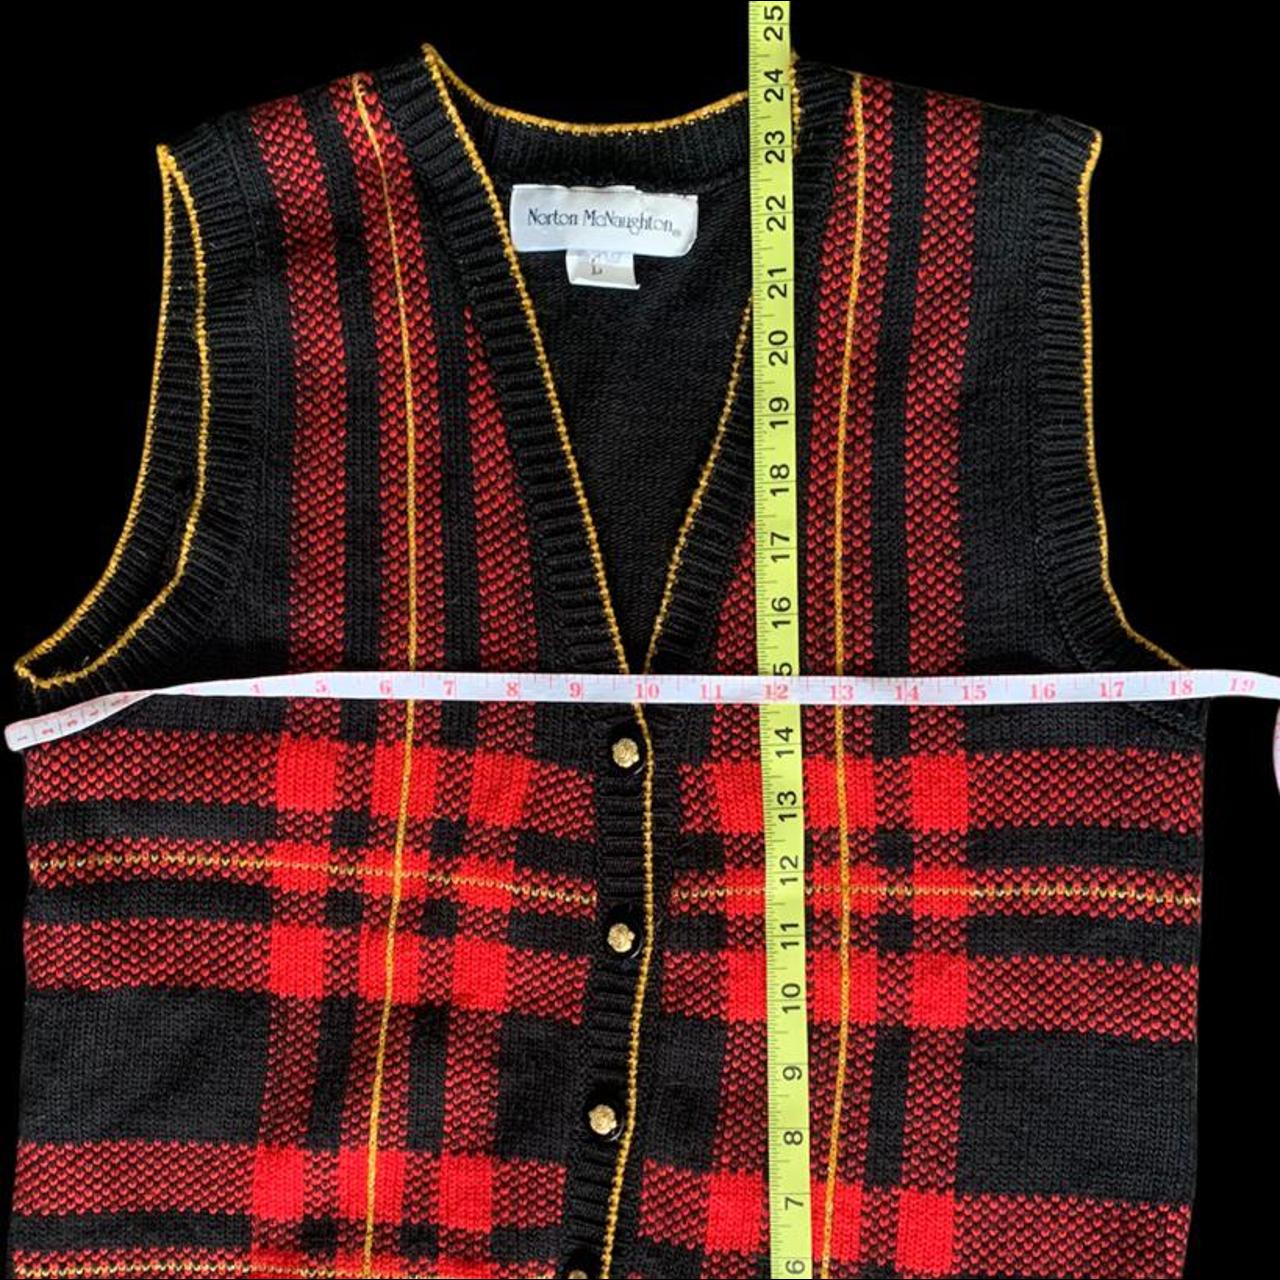 American Vintage Women's Red and Black Gilet (3)